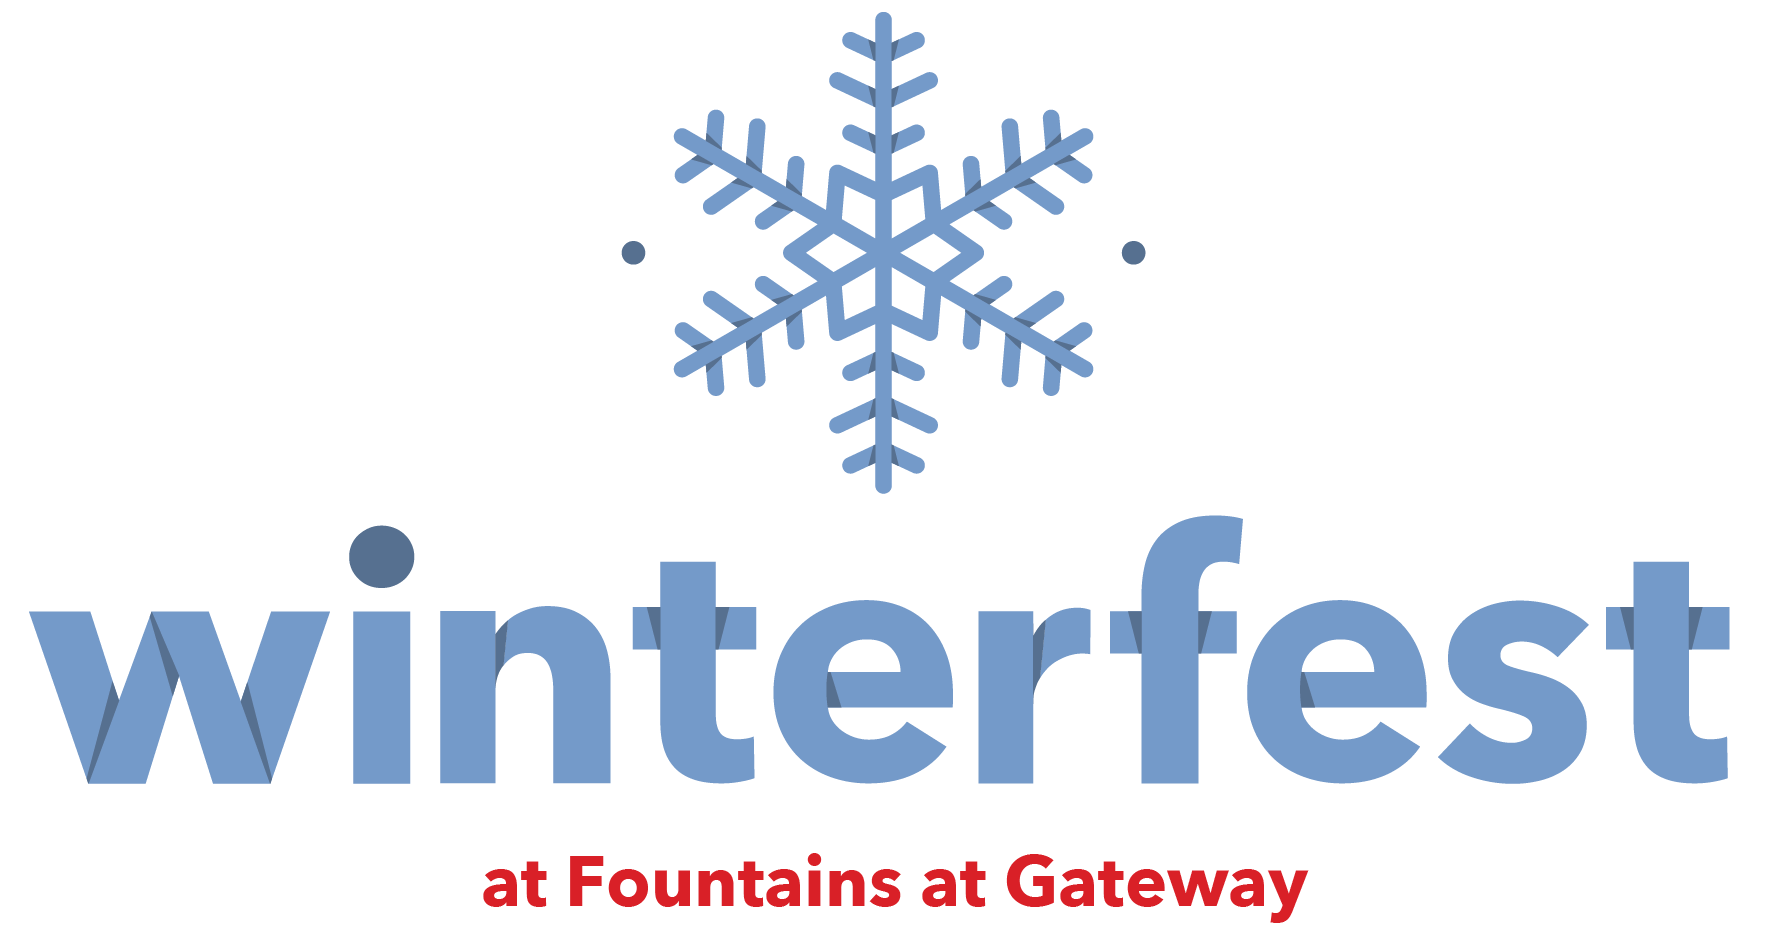 Winterfest at the Fountains